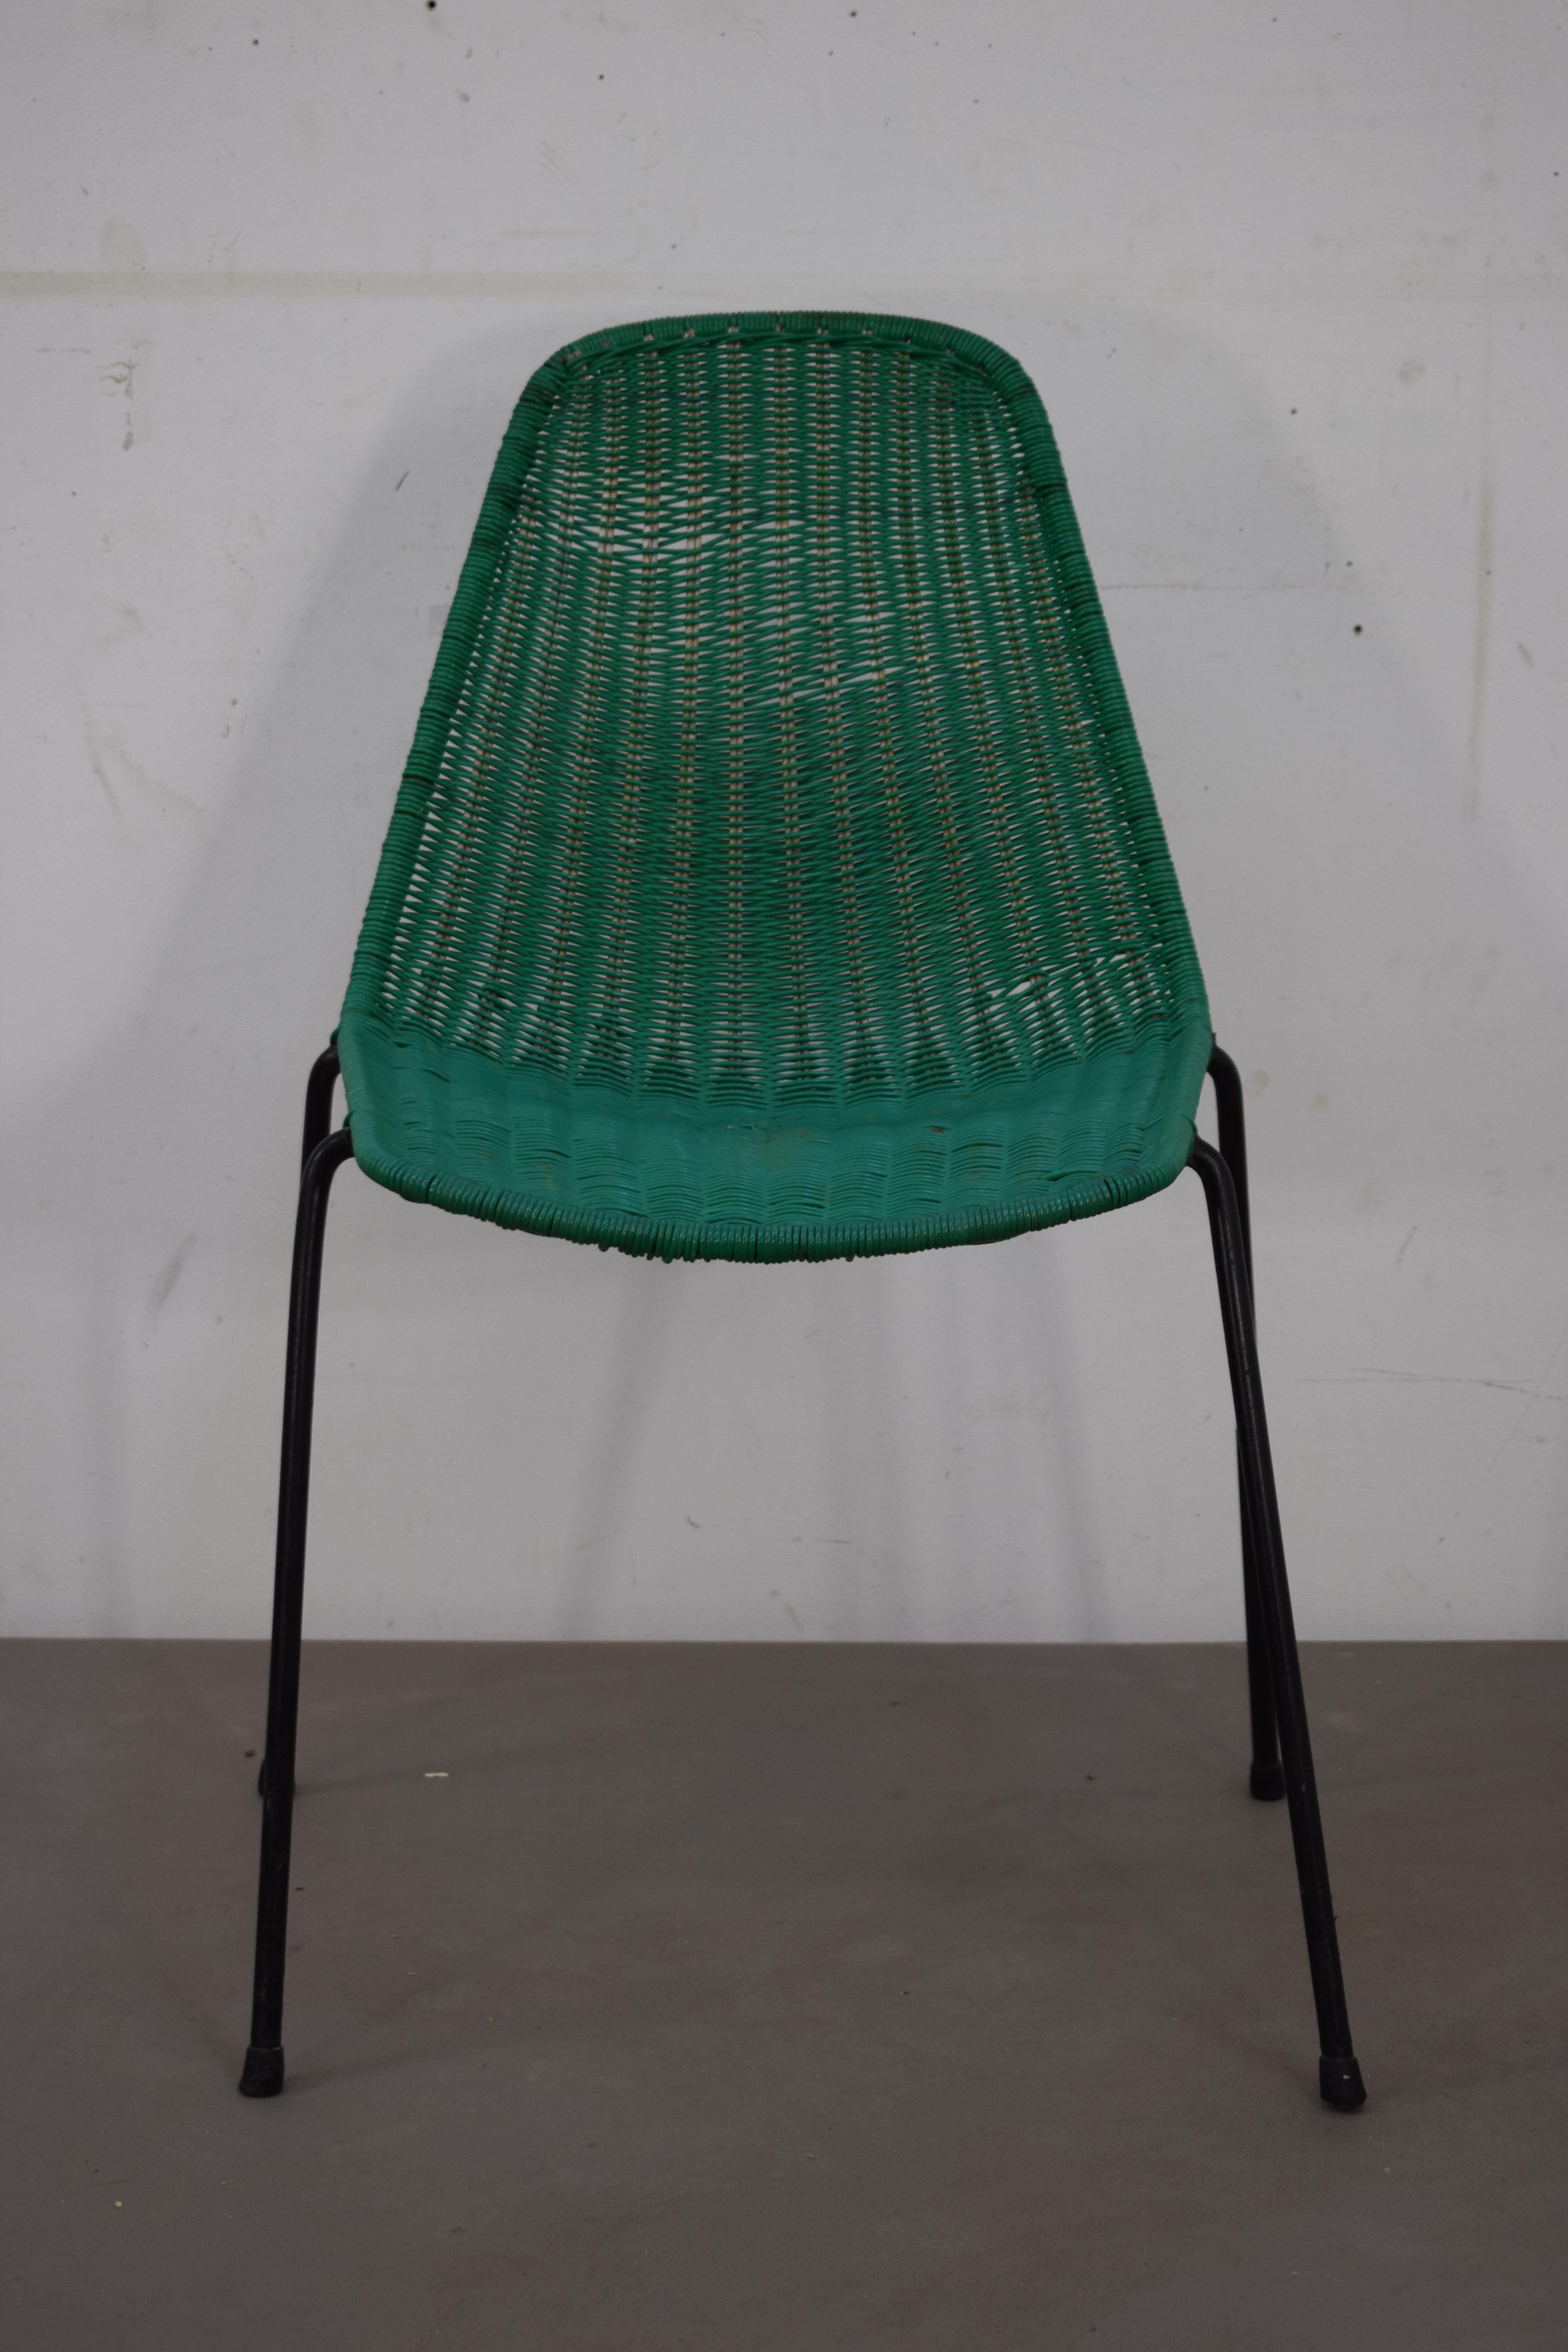 Gianfranco Legler, set of two chairs, 1960s.
Dimensions: H=80 cm; W=50 cm; D=53 cm; Height seat= 45 cm.